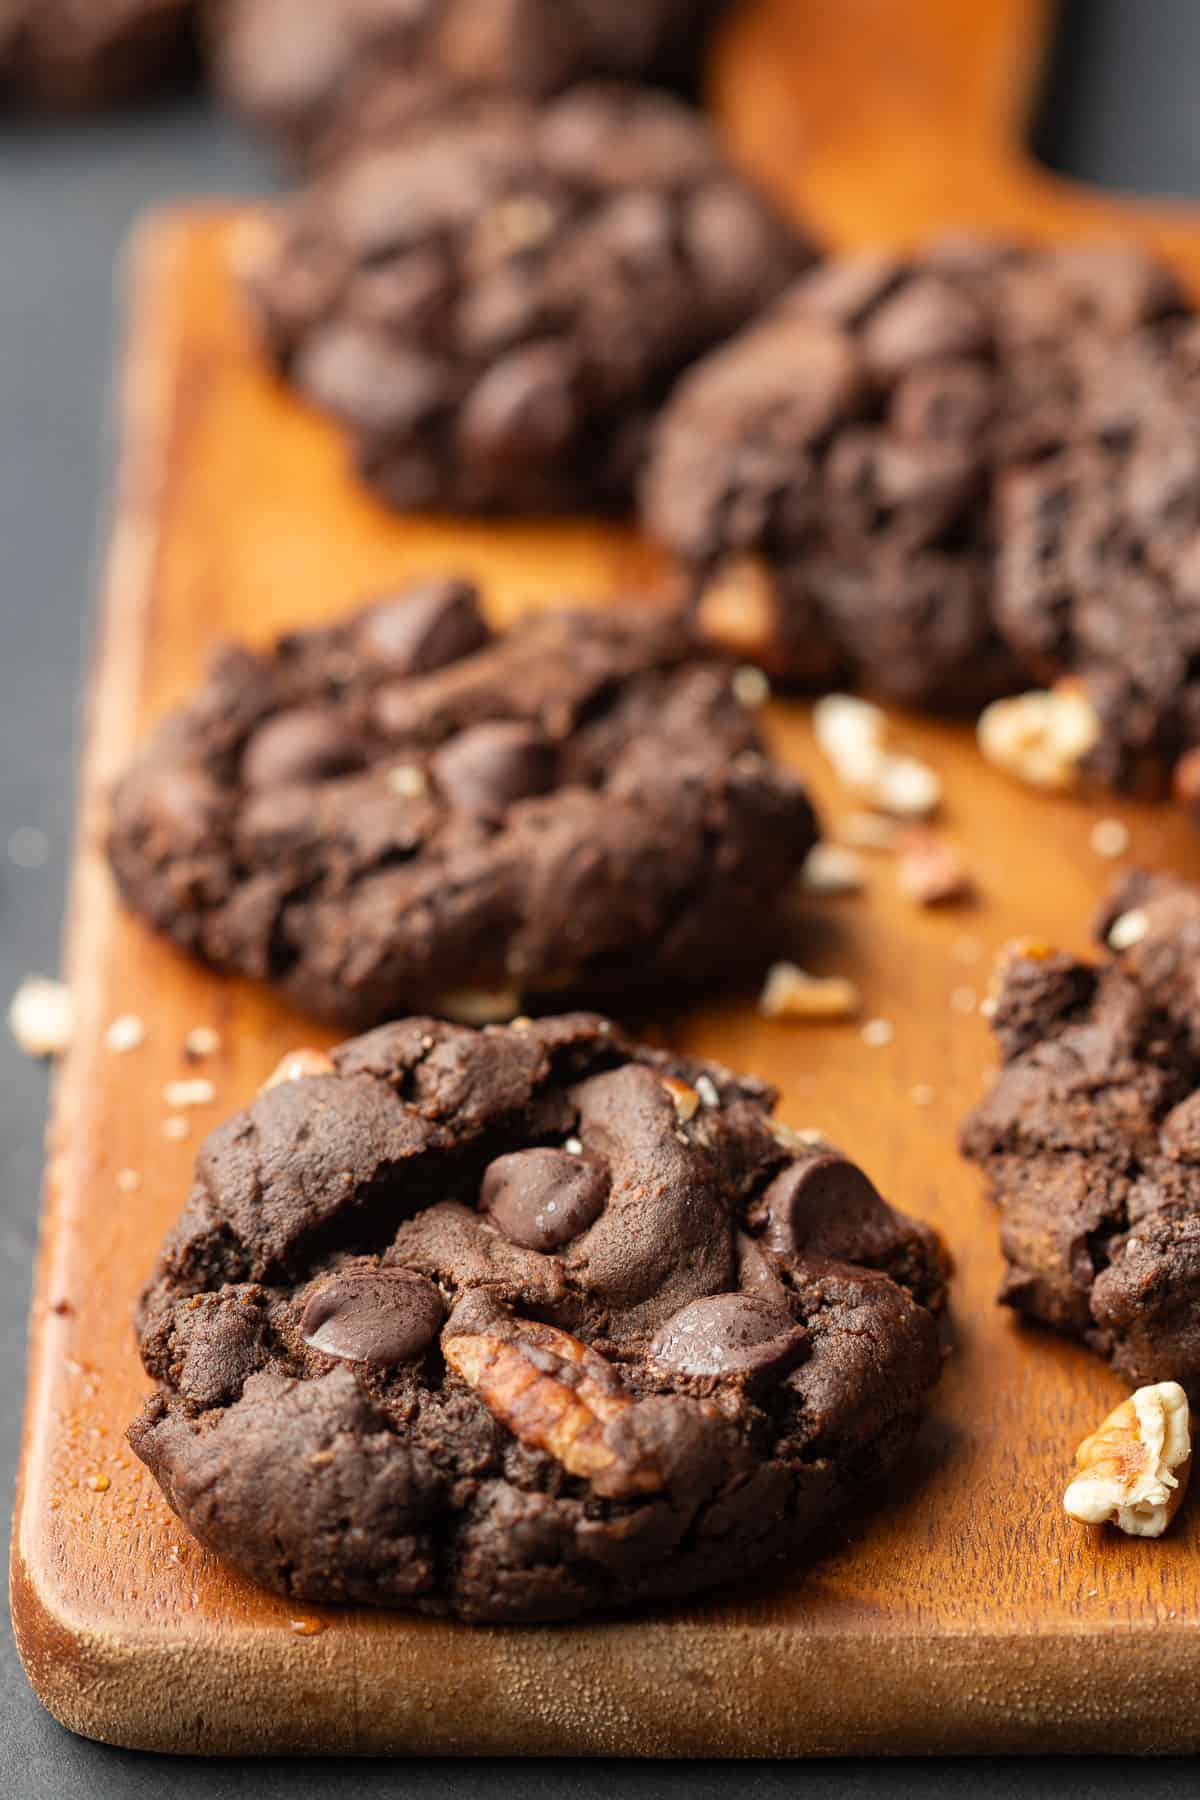 Vegan Double Chocolate Cookies arranged on a wooden cutting board sprinkled with pecan pieces.